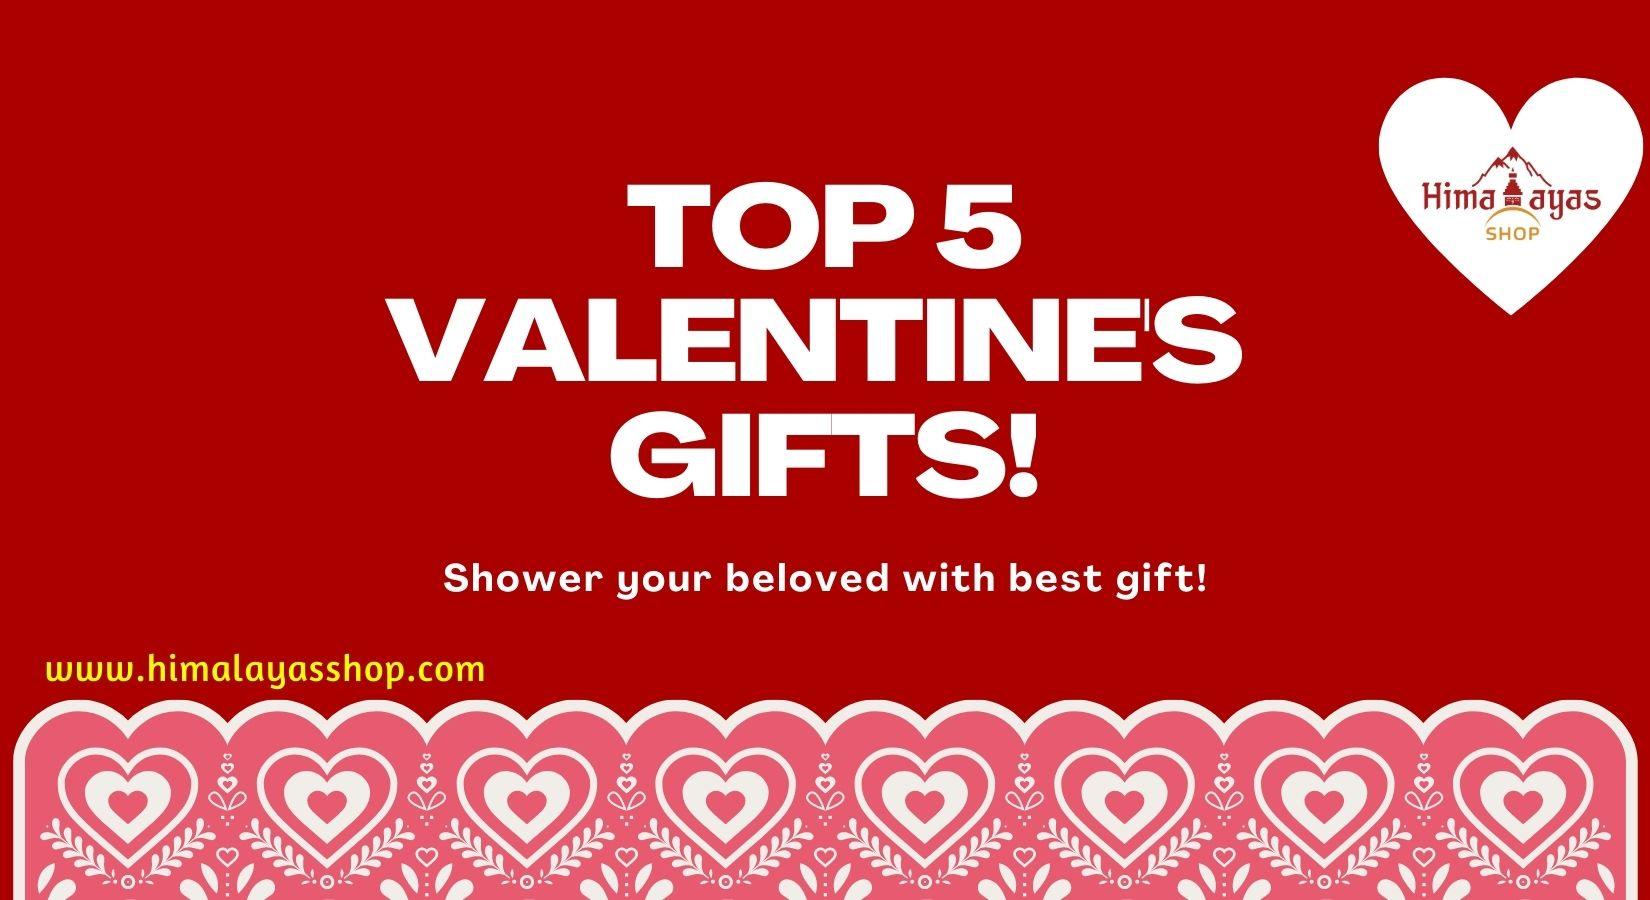 Top 5 gifts for your Valentine on 2021 - Himalayas Shop